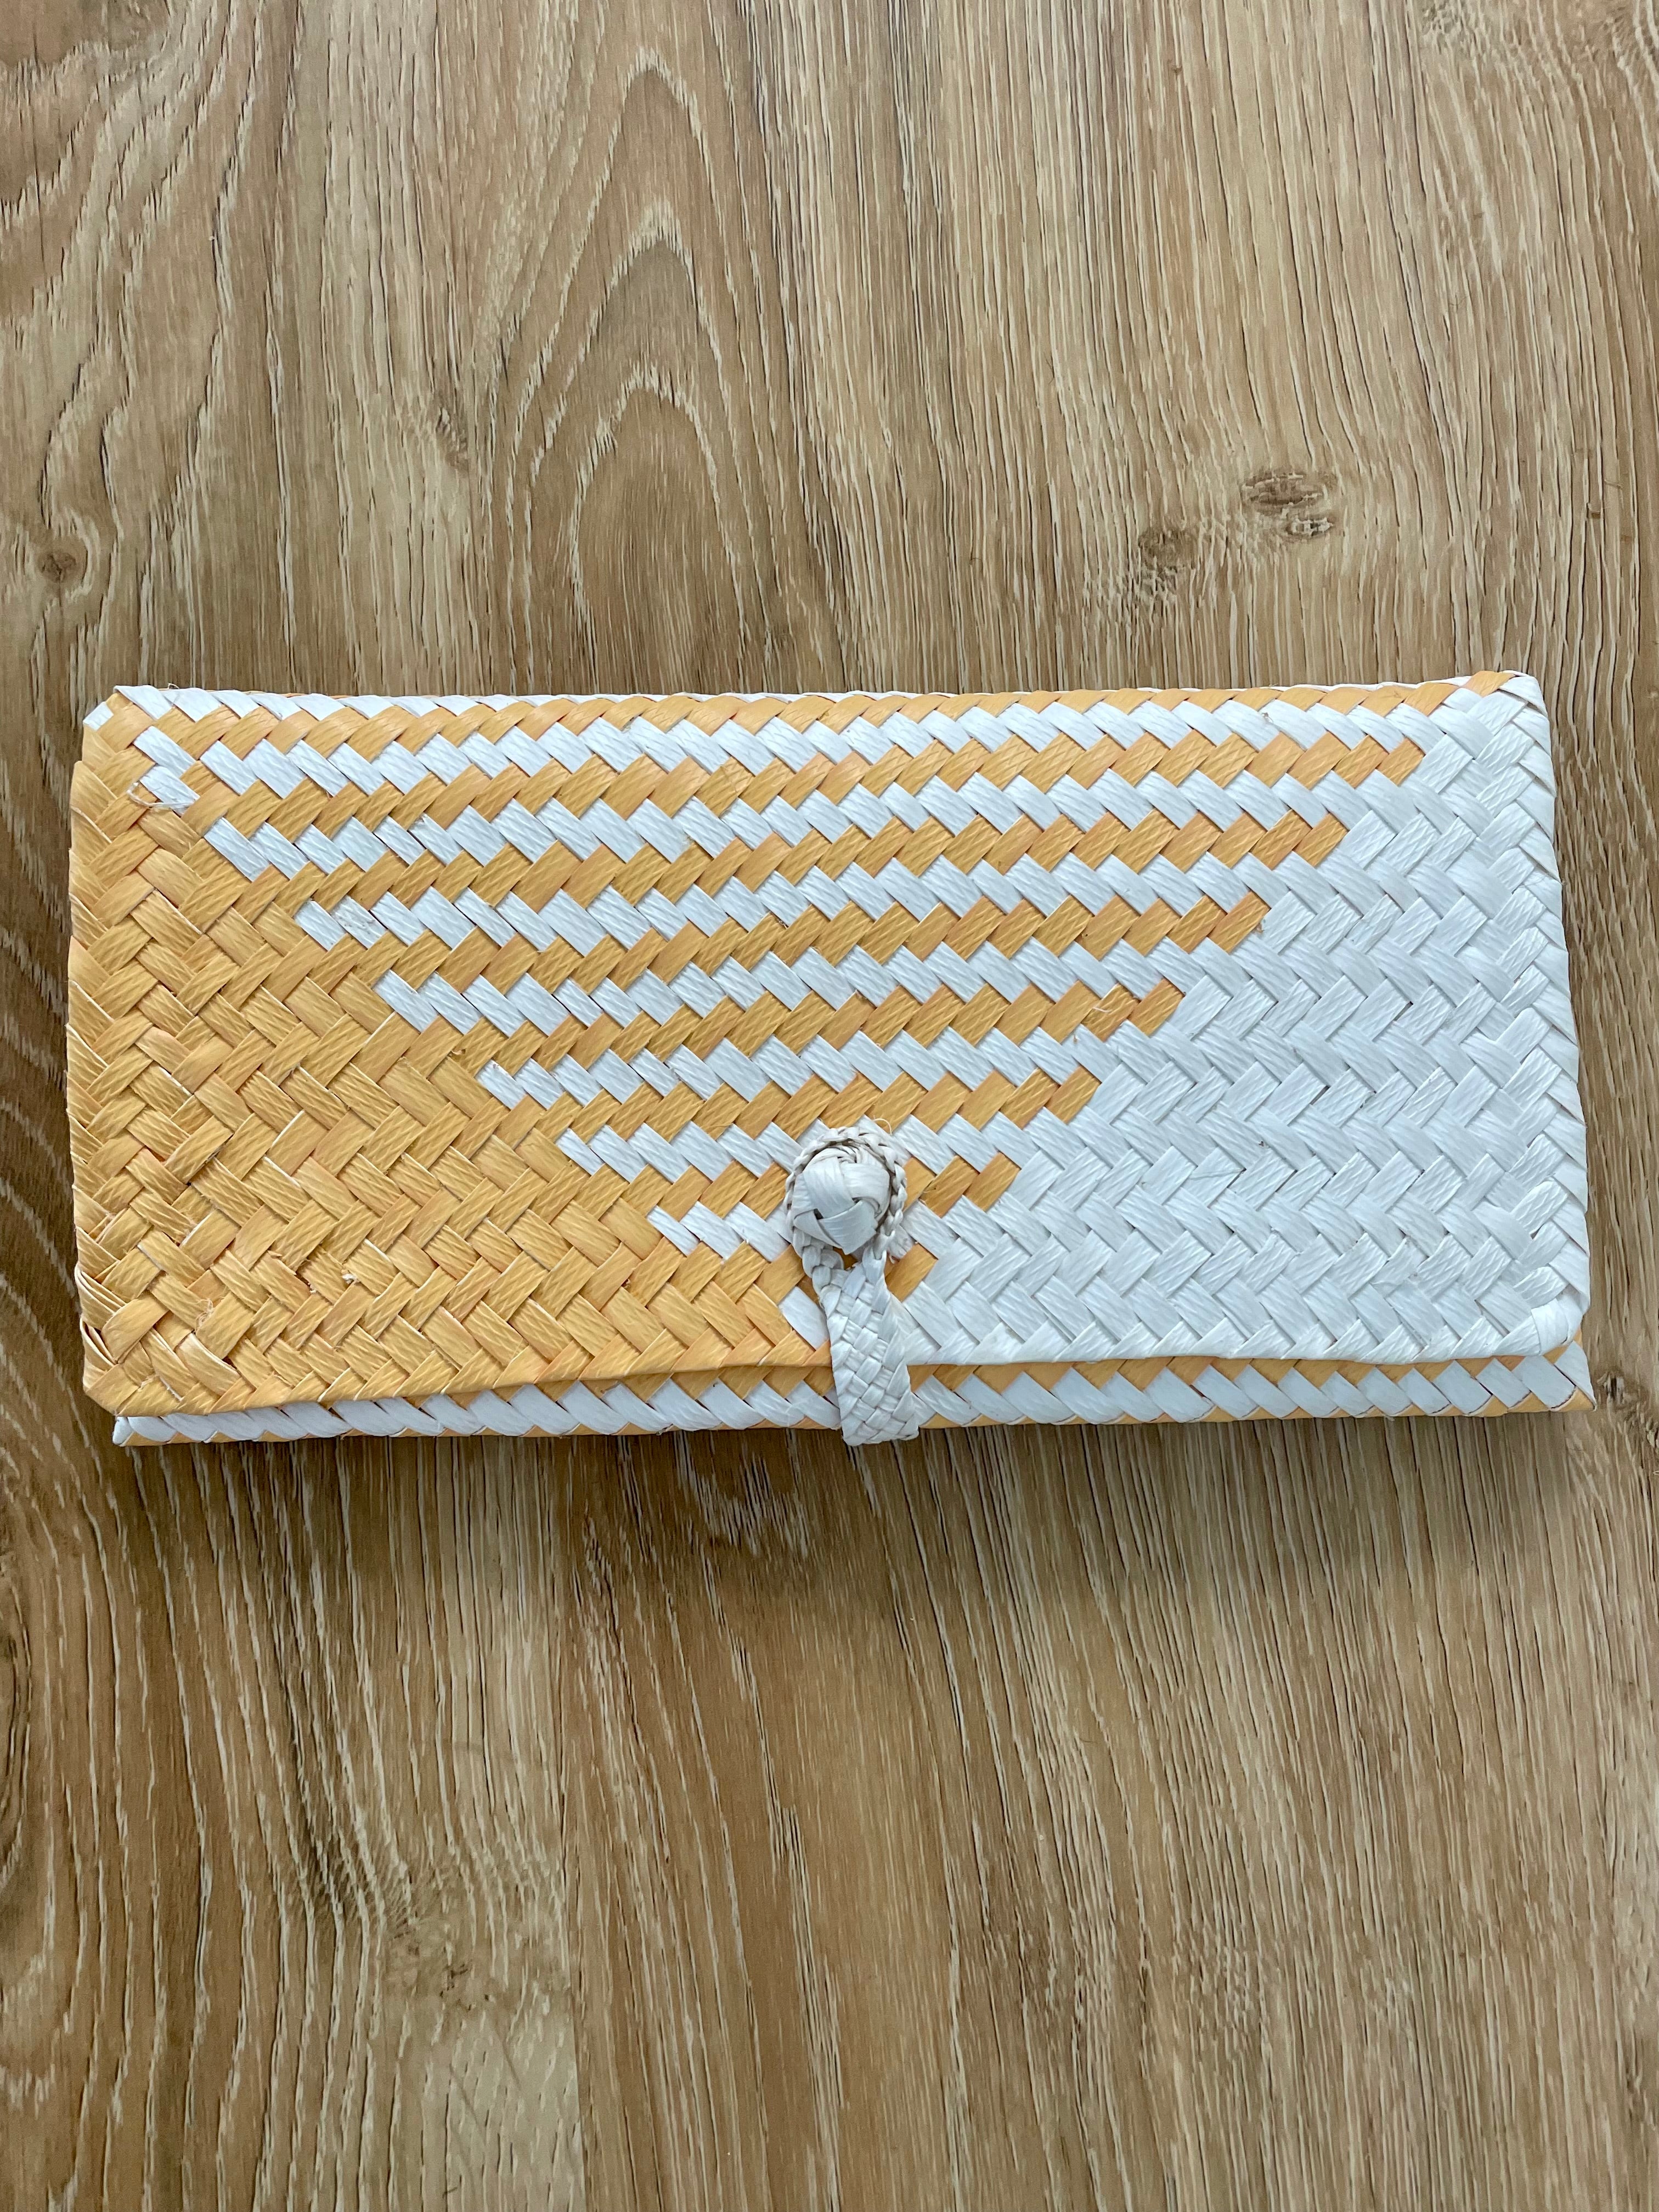 Buttermilk Yellow & White Patterned Clutch